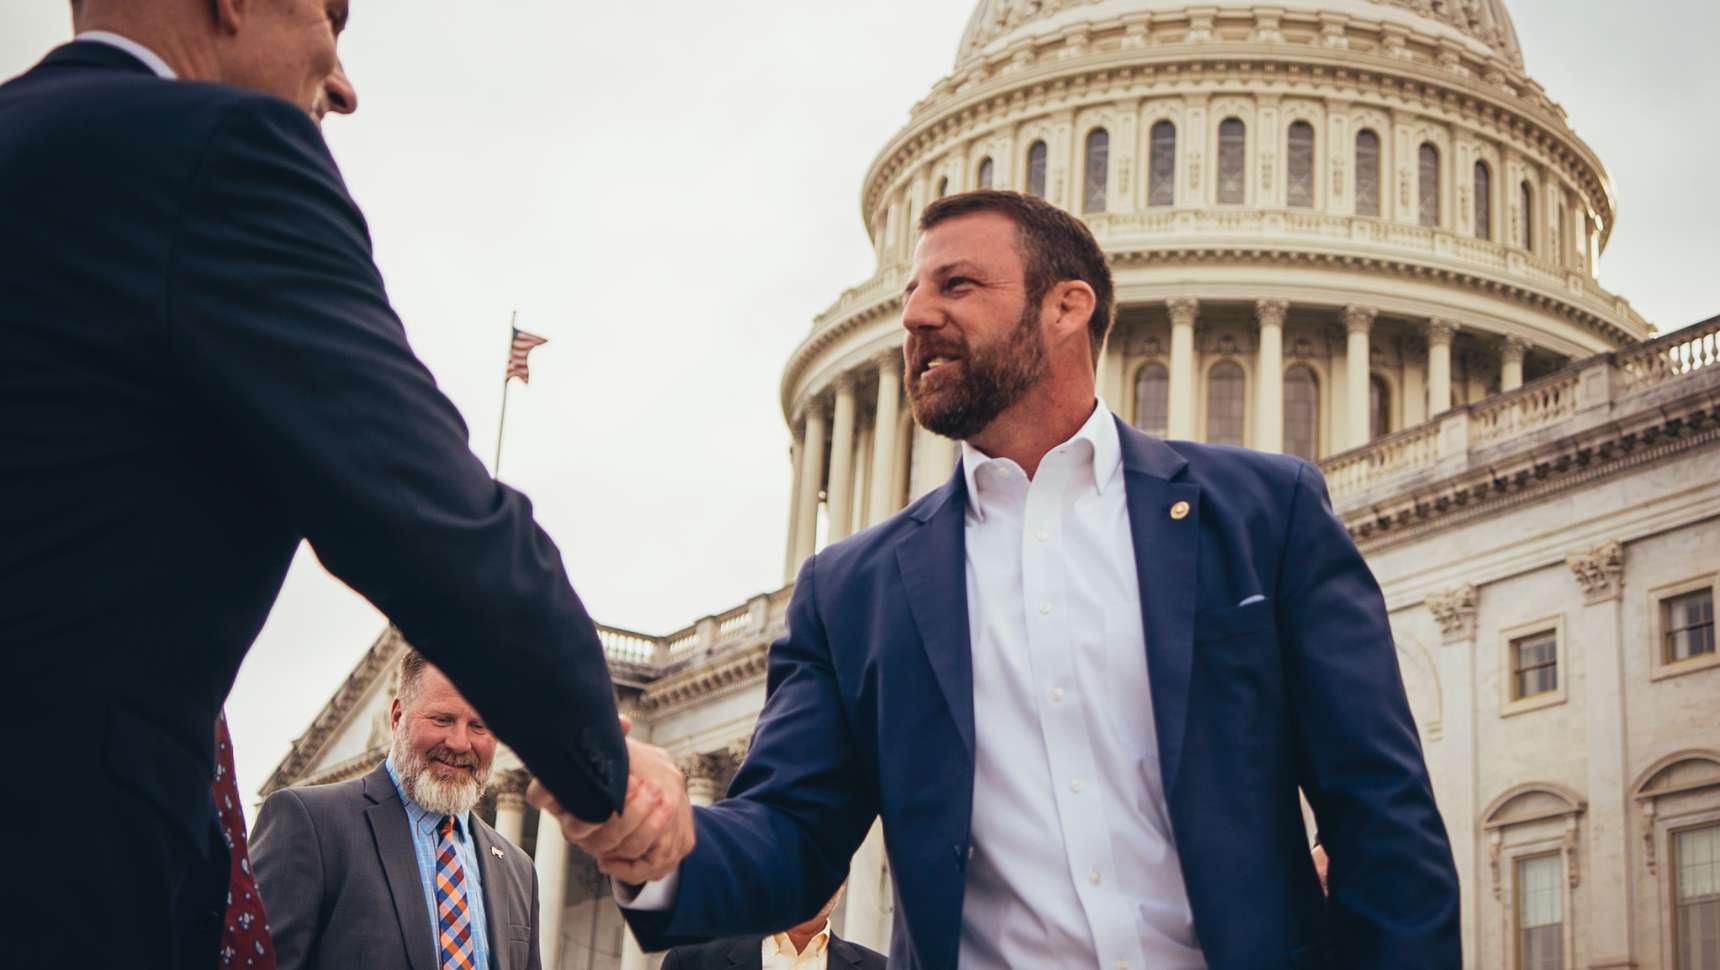 Senator Mullin shaking hands in front of the capitol building